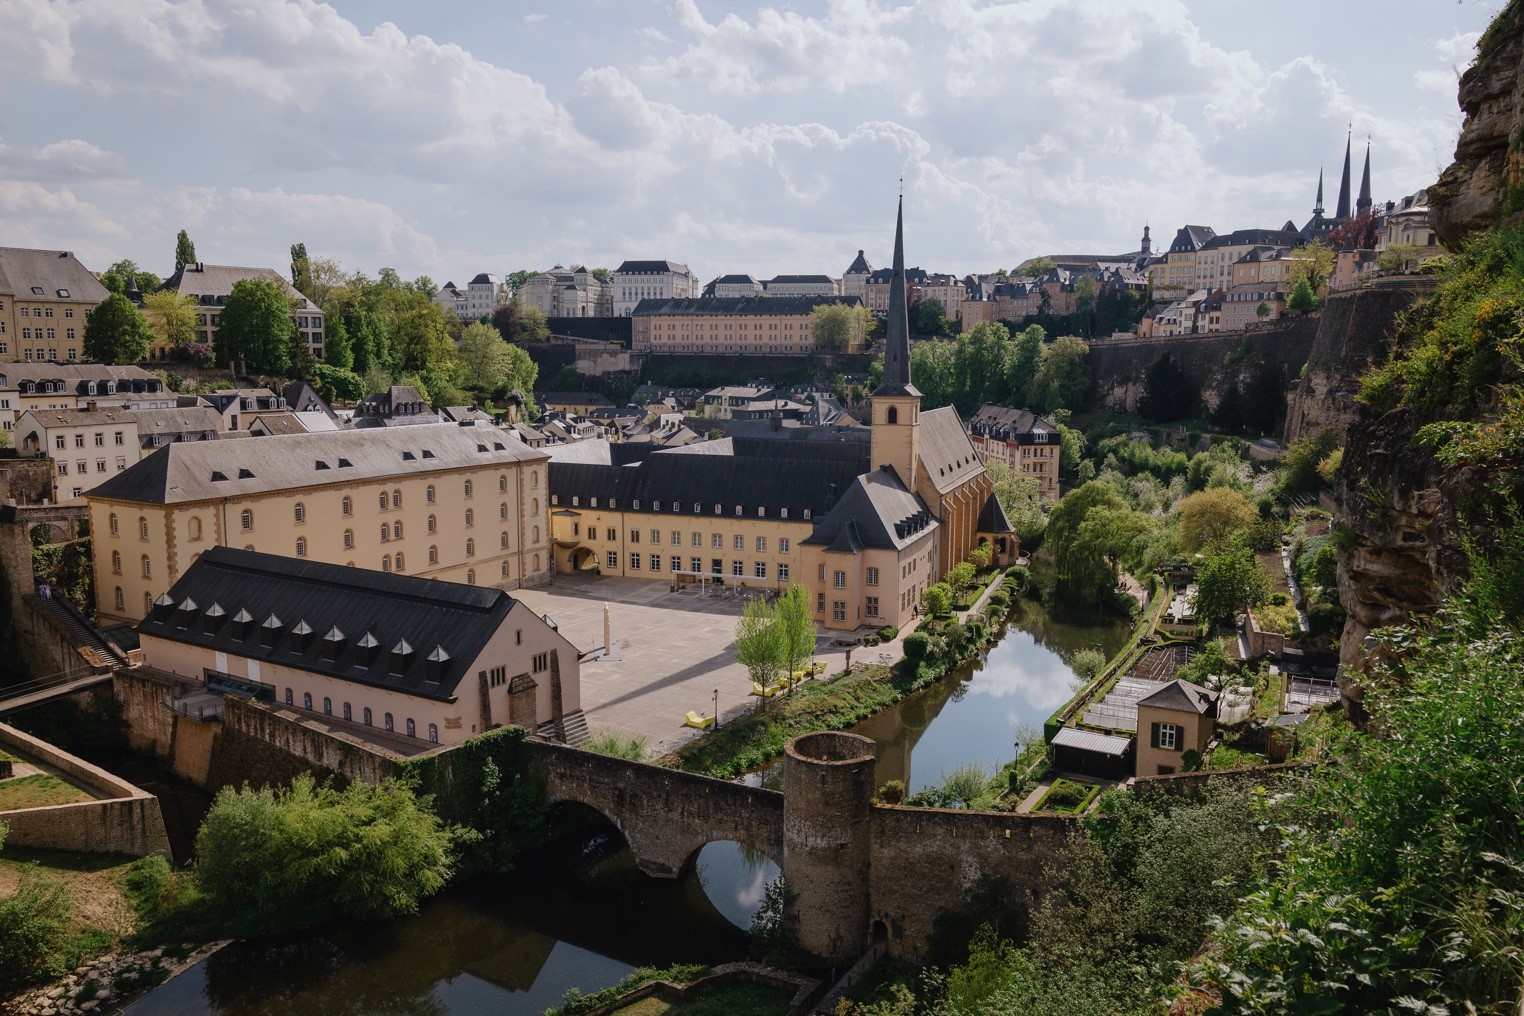 22 good reasons to visit Luxembourg City as a Tourist